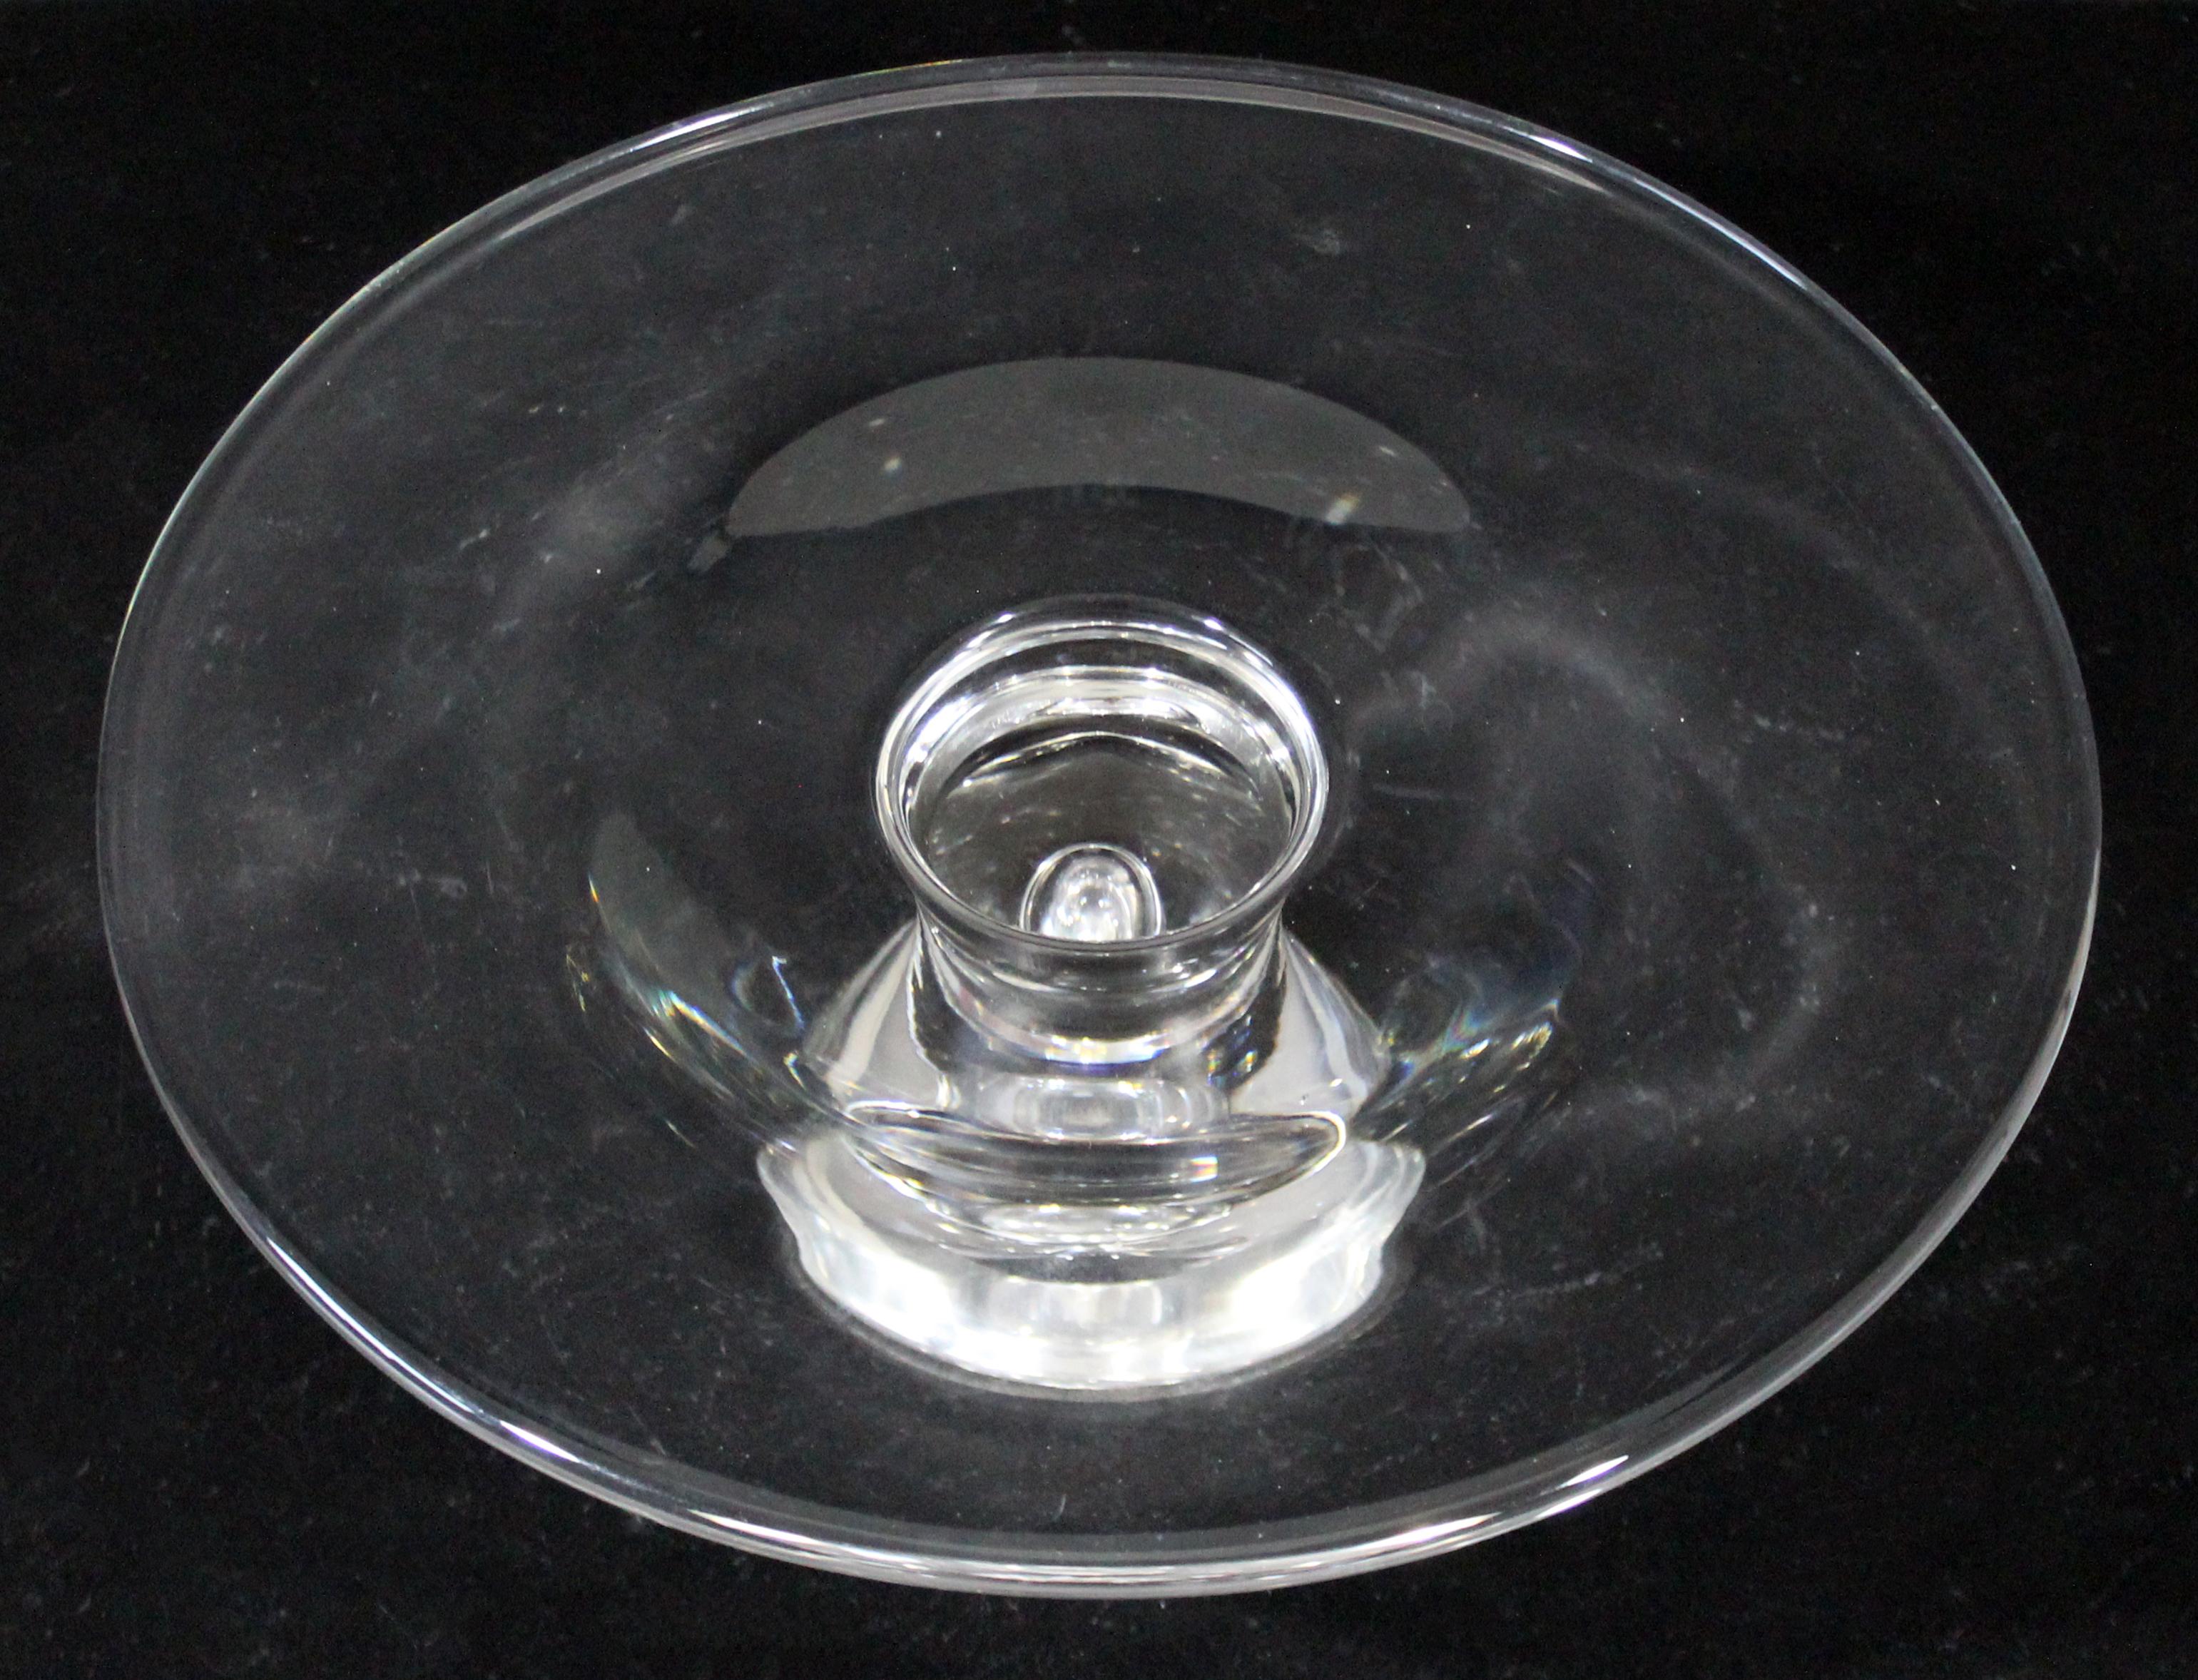 For your consideration is an attractive, Steuben crystal glass teardrop cake dish. In excellent condition. The dimensions are 12